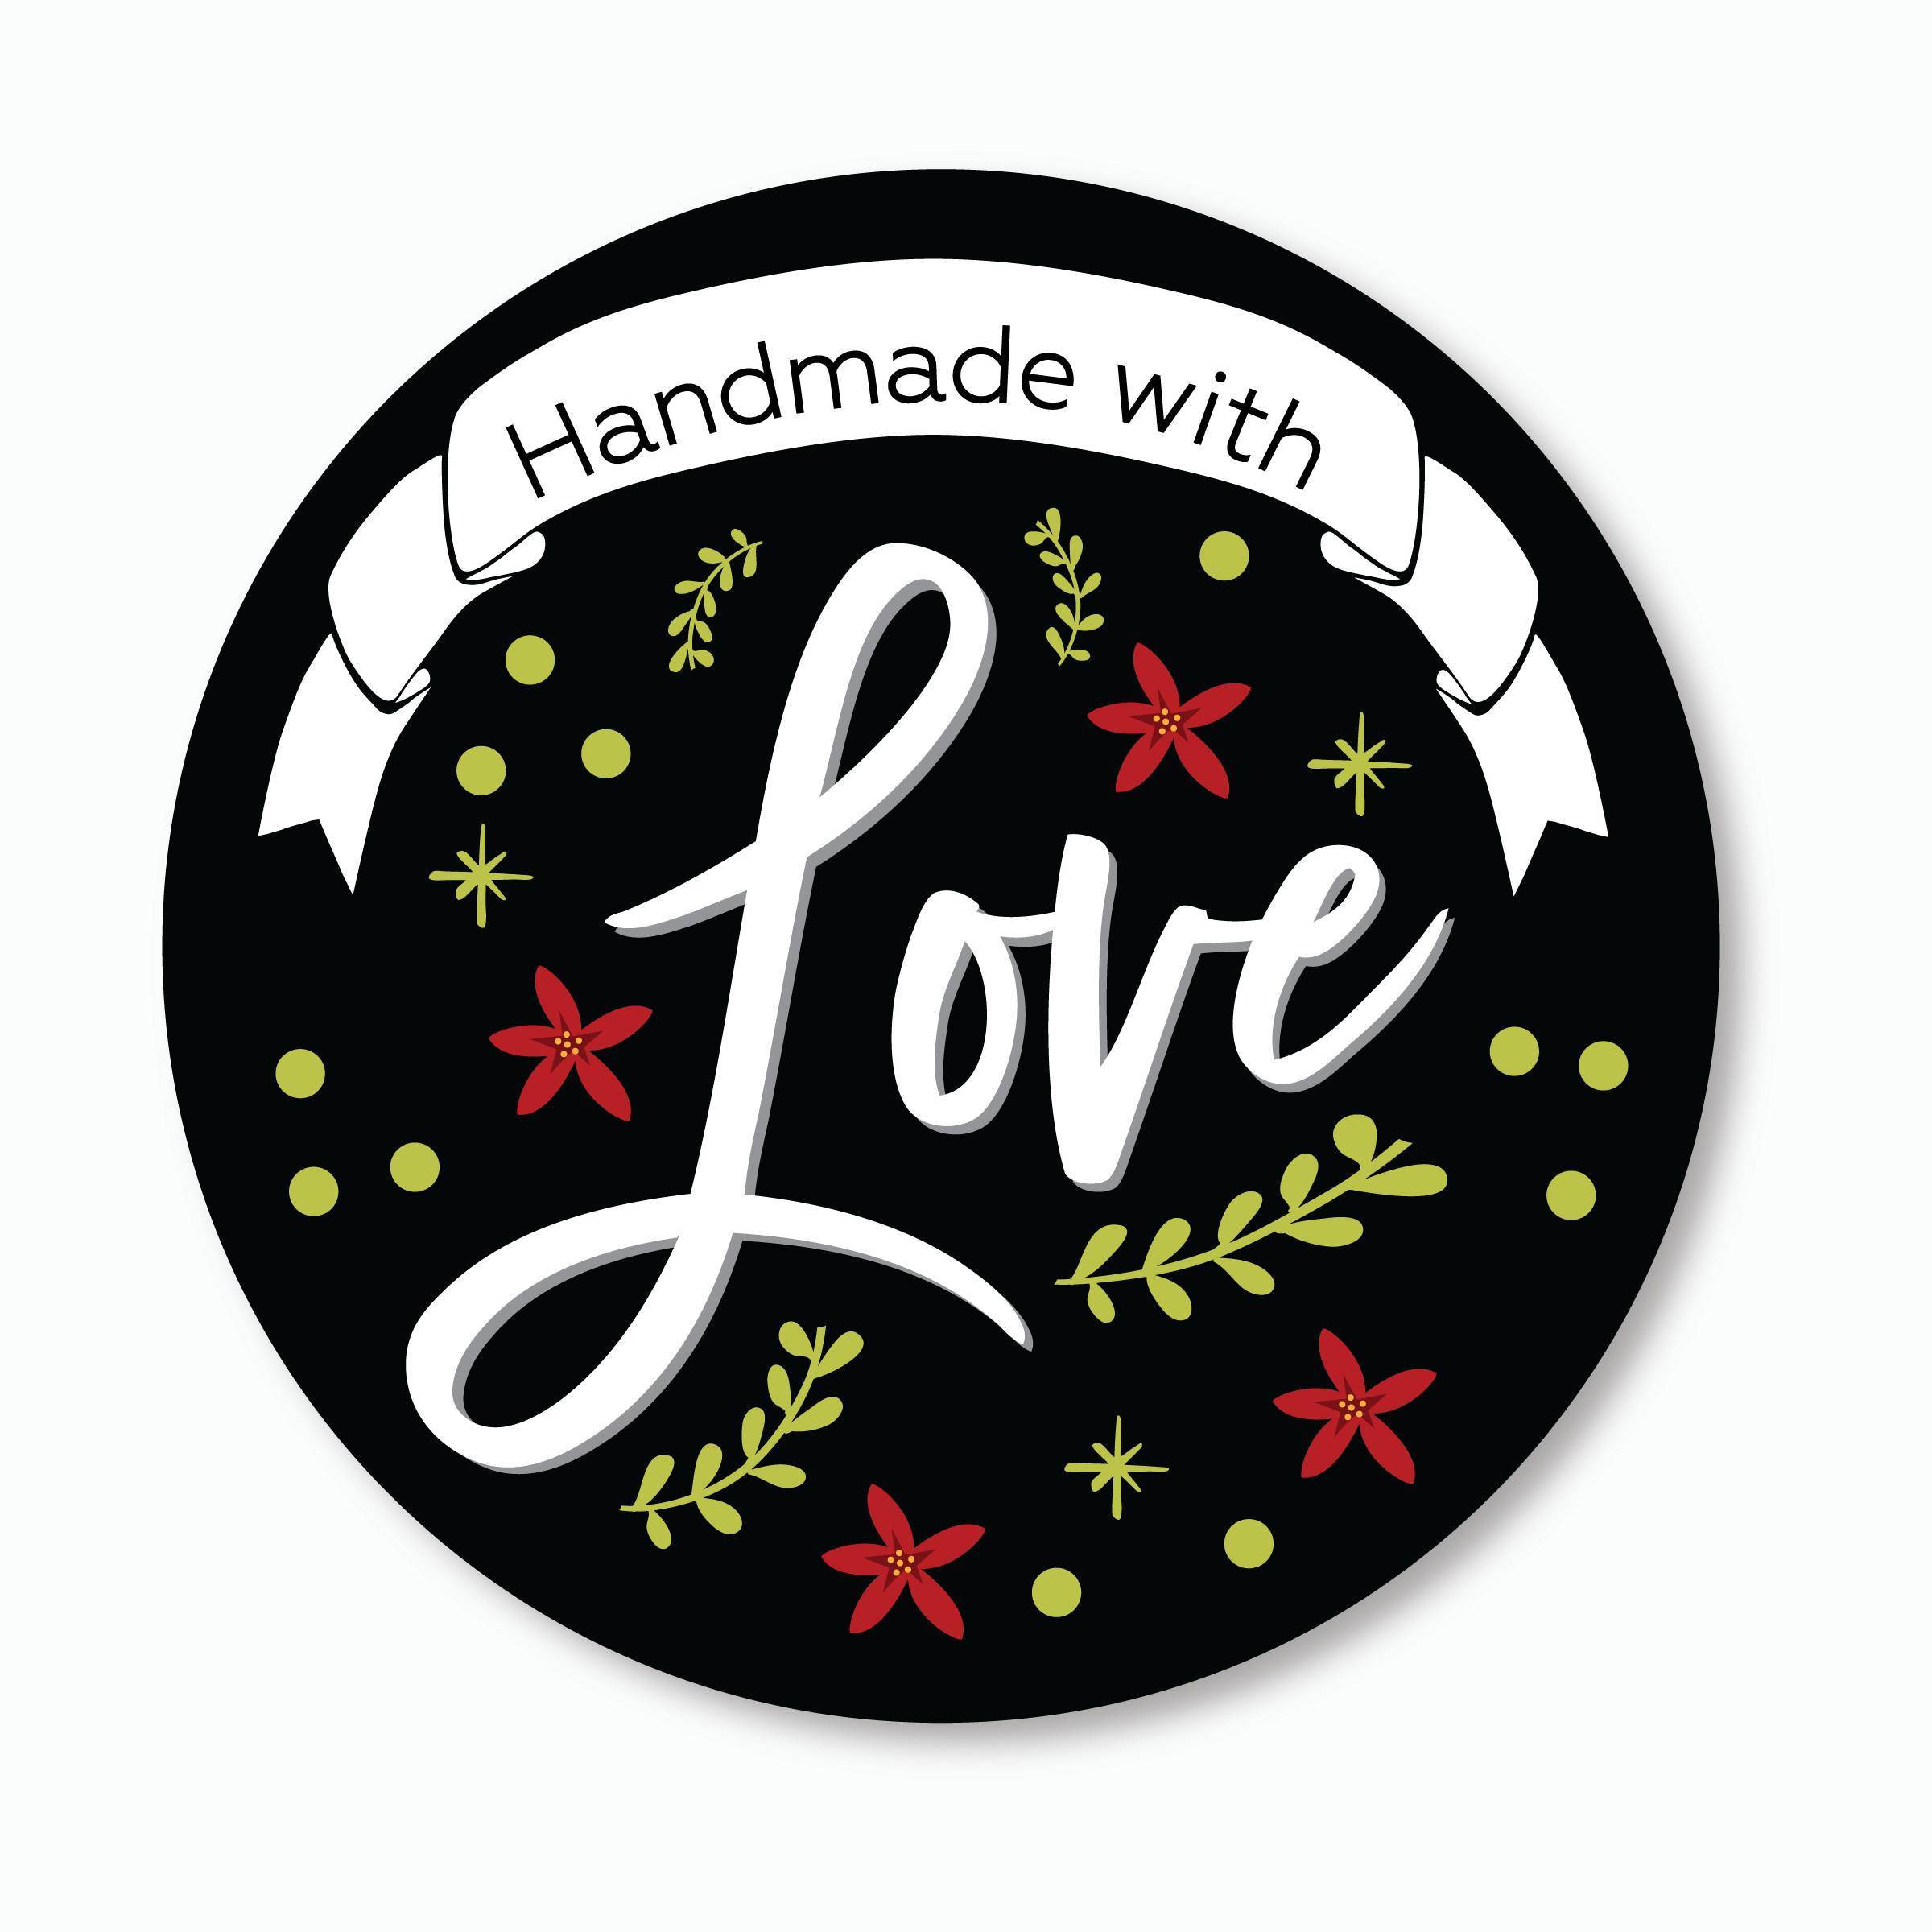 240 Pcs Handmade with Love Prayers Stickers,Cute Small Business Envelopes Stickers for Business Packages/Handmade Goods/Bags,Christmas Theme Small